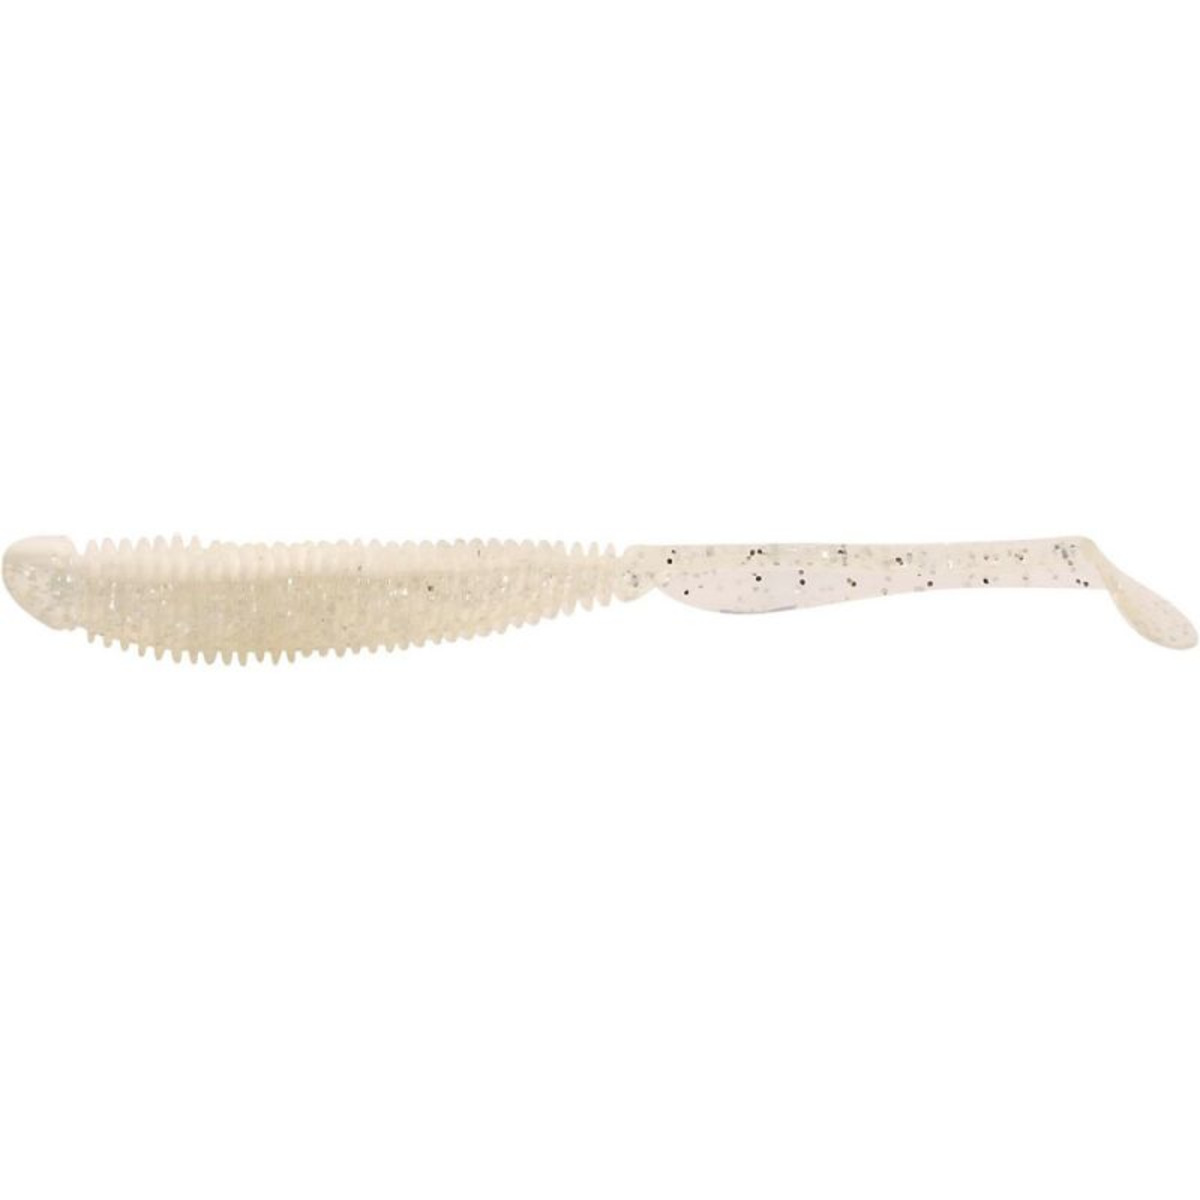 Rapture Soul Shad - 7.5 cm - White Ghost